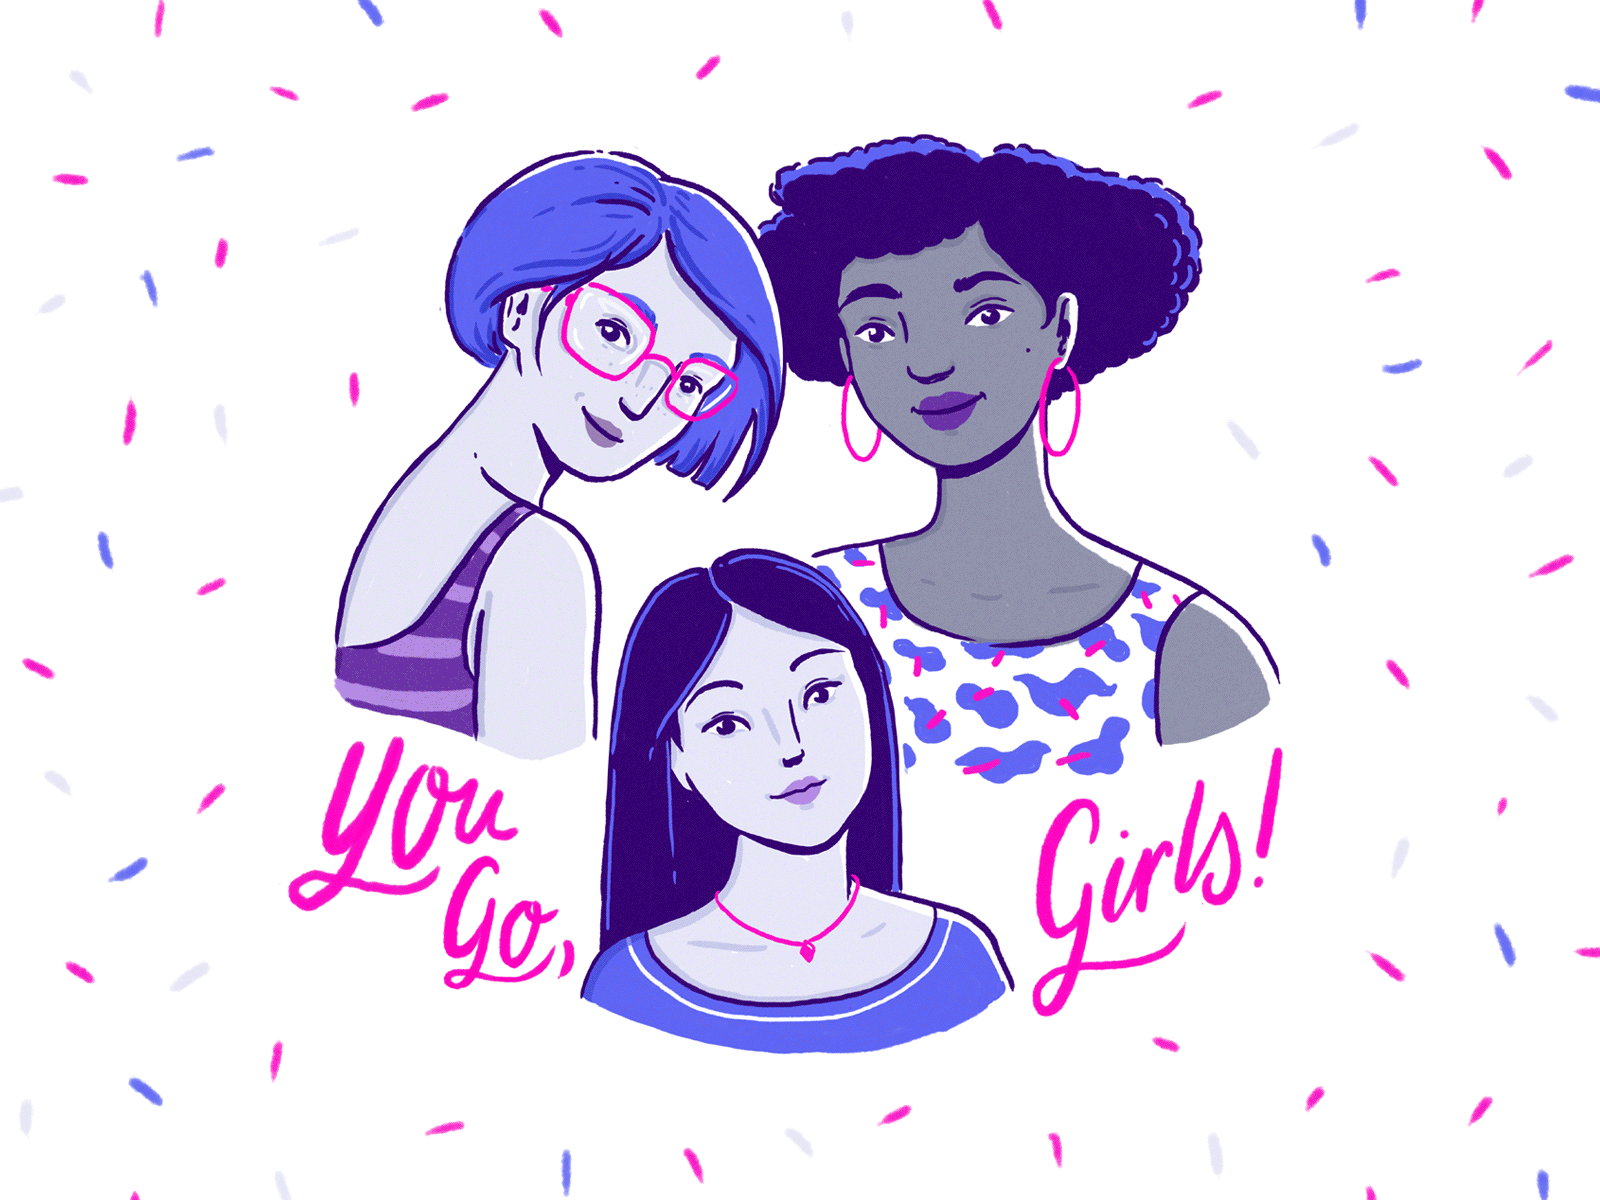 Have a great Women's Day! celebration character design differences diversity drawing feminism girl power girls illustration lettering self care women women empowerment womens day